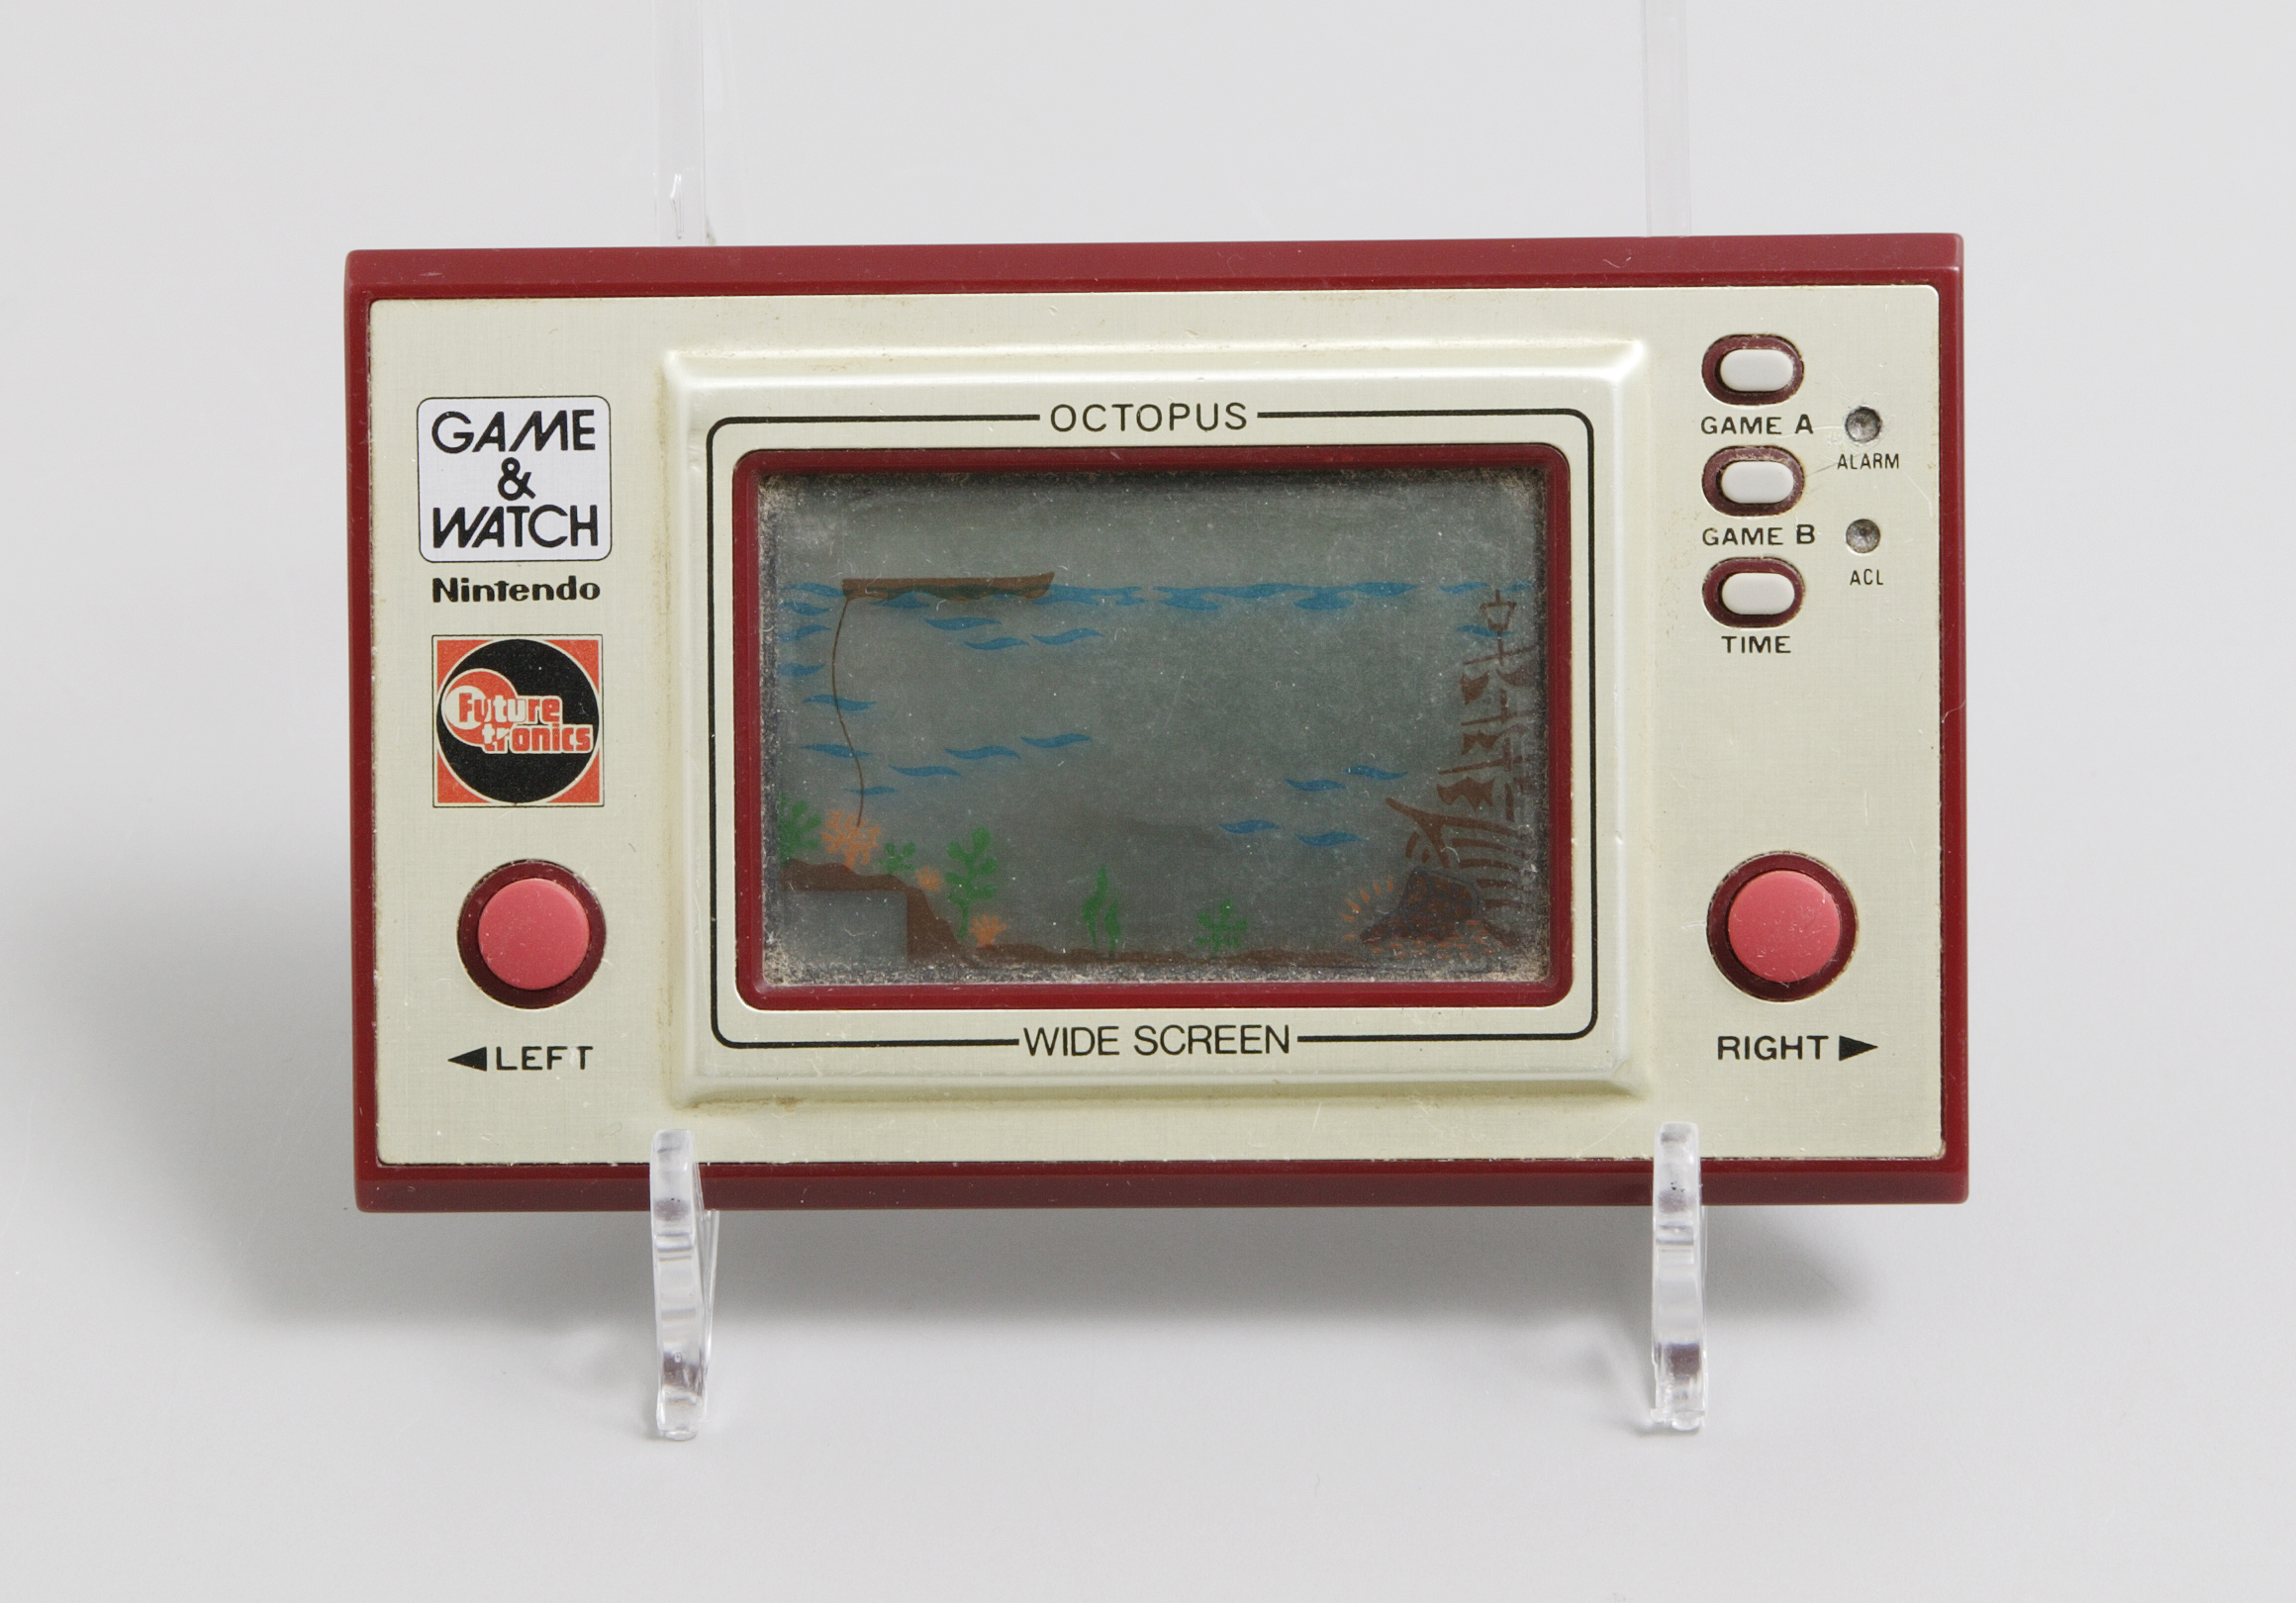 Octopus Game & Watch by Nintendo